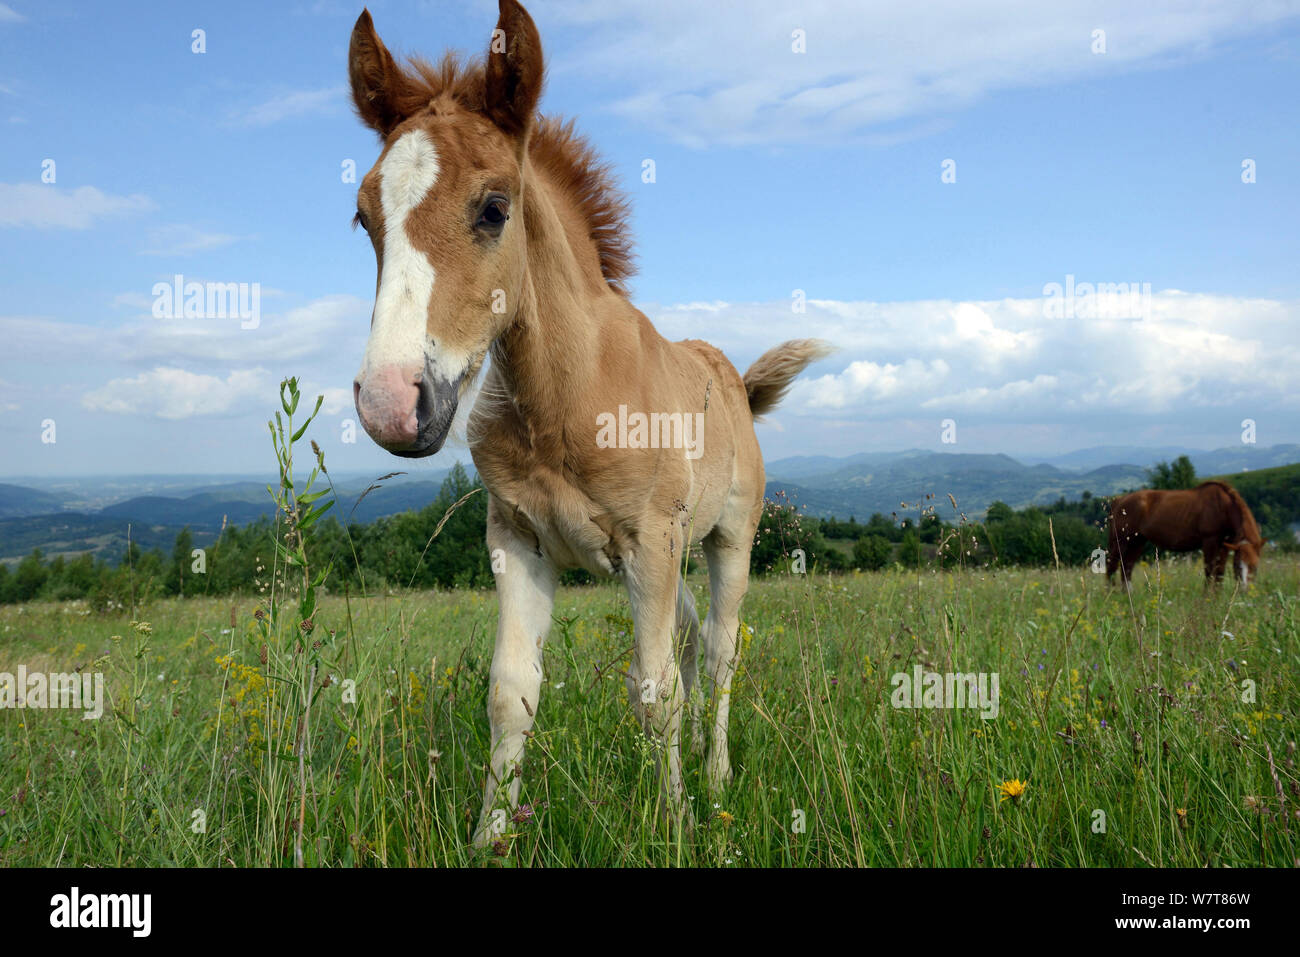 Hutsul foal (Equus caballus) in flower-rich pasture in the foothills of the Carpathian Mountains, Transcarpathia, Ukraine, June 2013. Stock Photo